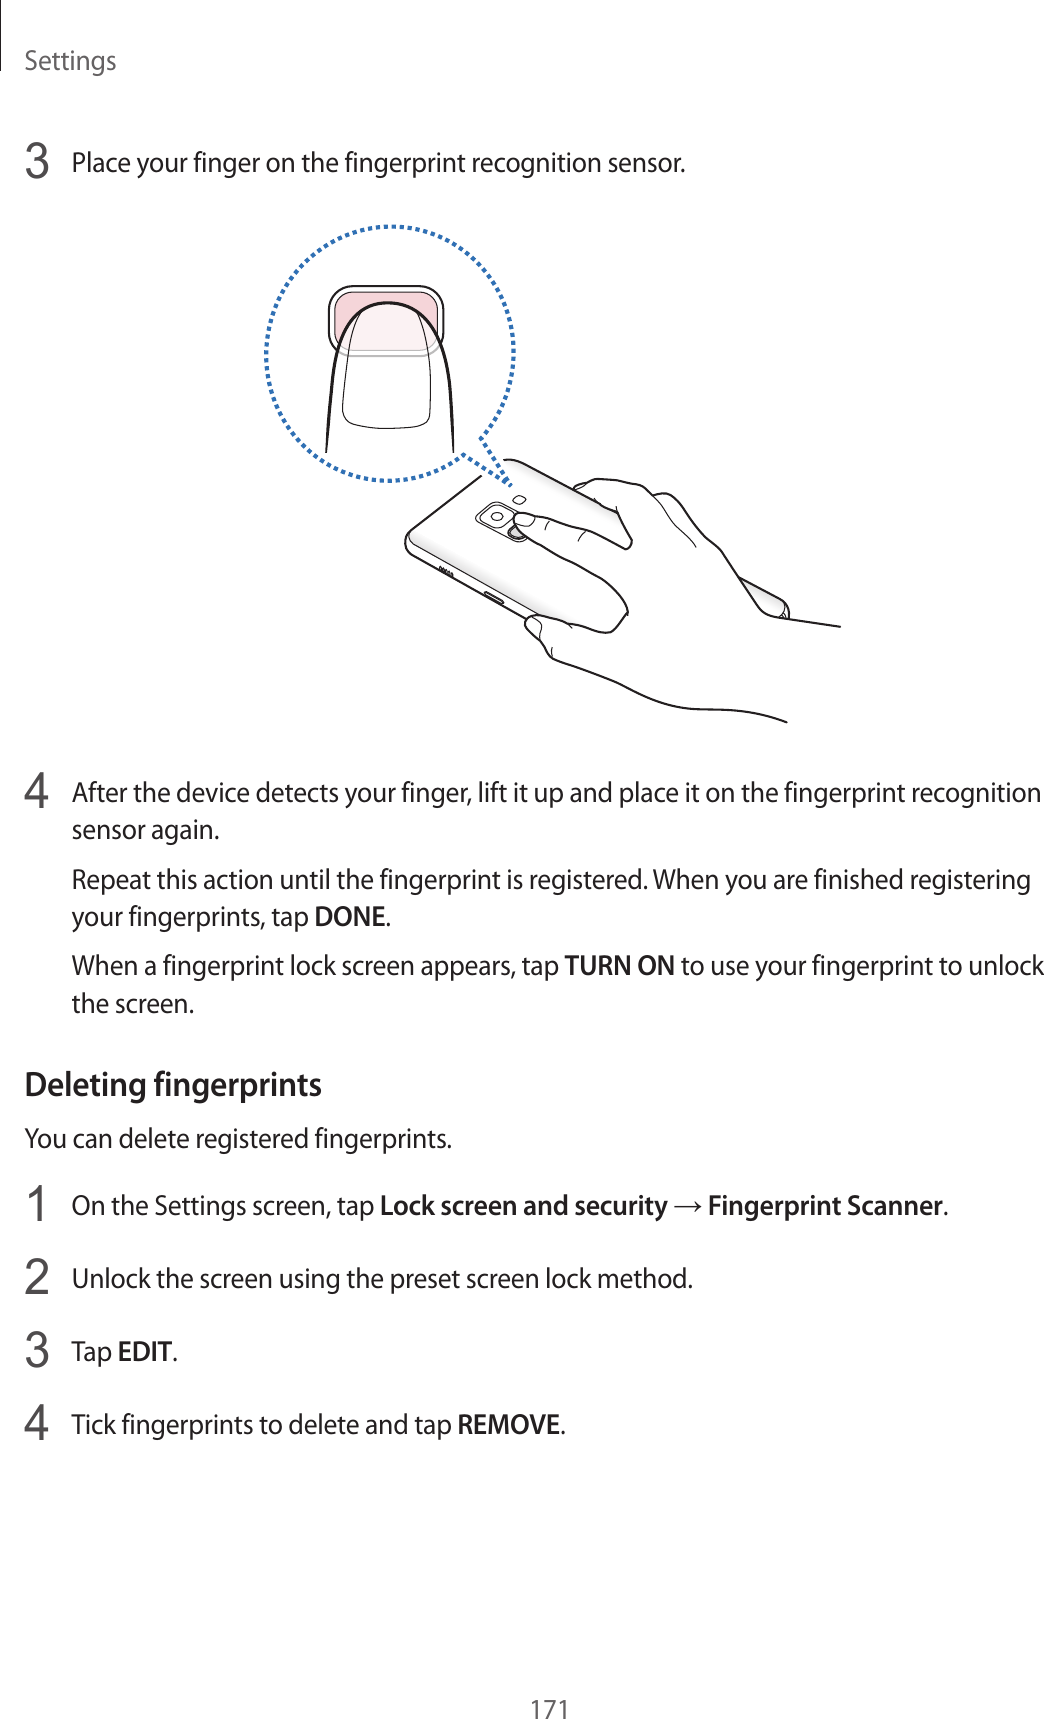 Settings1713  Place your finger on the fingerprint recognition sensor.4  After the device detects your finger, lift it up and place it on the fingerprint recognition sensor again.Repeat this action until the fingerprint is registered. When you are finished registering your fingerprints, tap DONE.When a fingerprint lock screen appears, tap TURN ON to use your fingerprint to unlock the screen.Deleting fingerprintsYou can delete registered fingerprints.1  On the Settings screen, tap Lock screen and security → Fingerprint Scanner.2  Unlock the screen using the preset screen lock method.3  Tap EDIT.4  Tick fingerprints to delete and tap REMOVE.